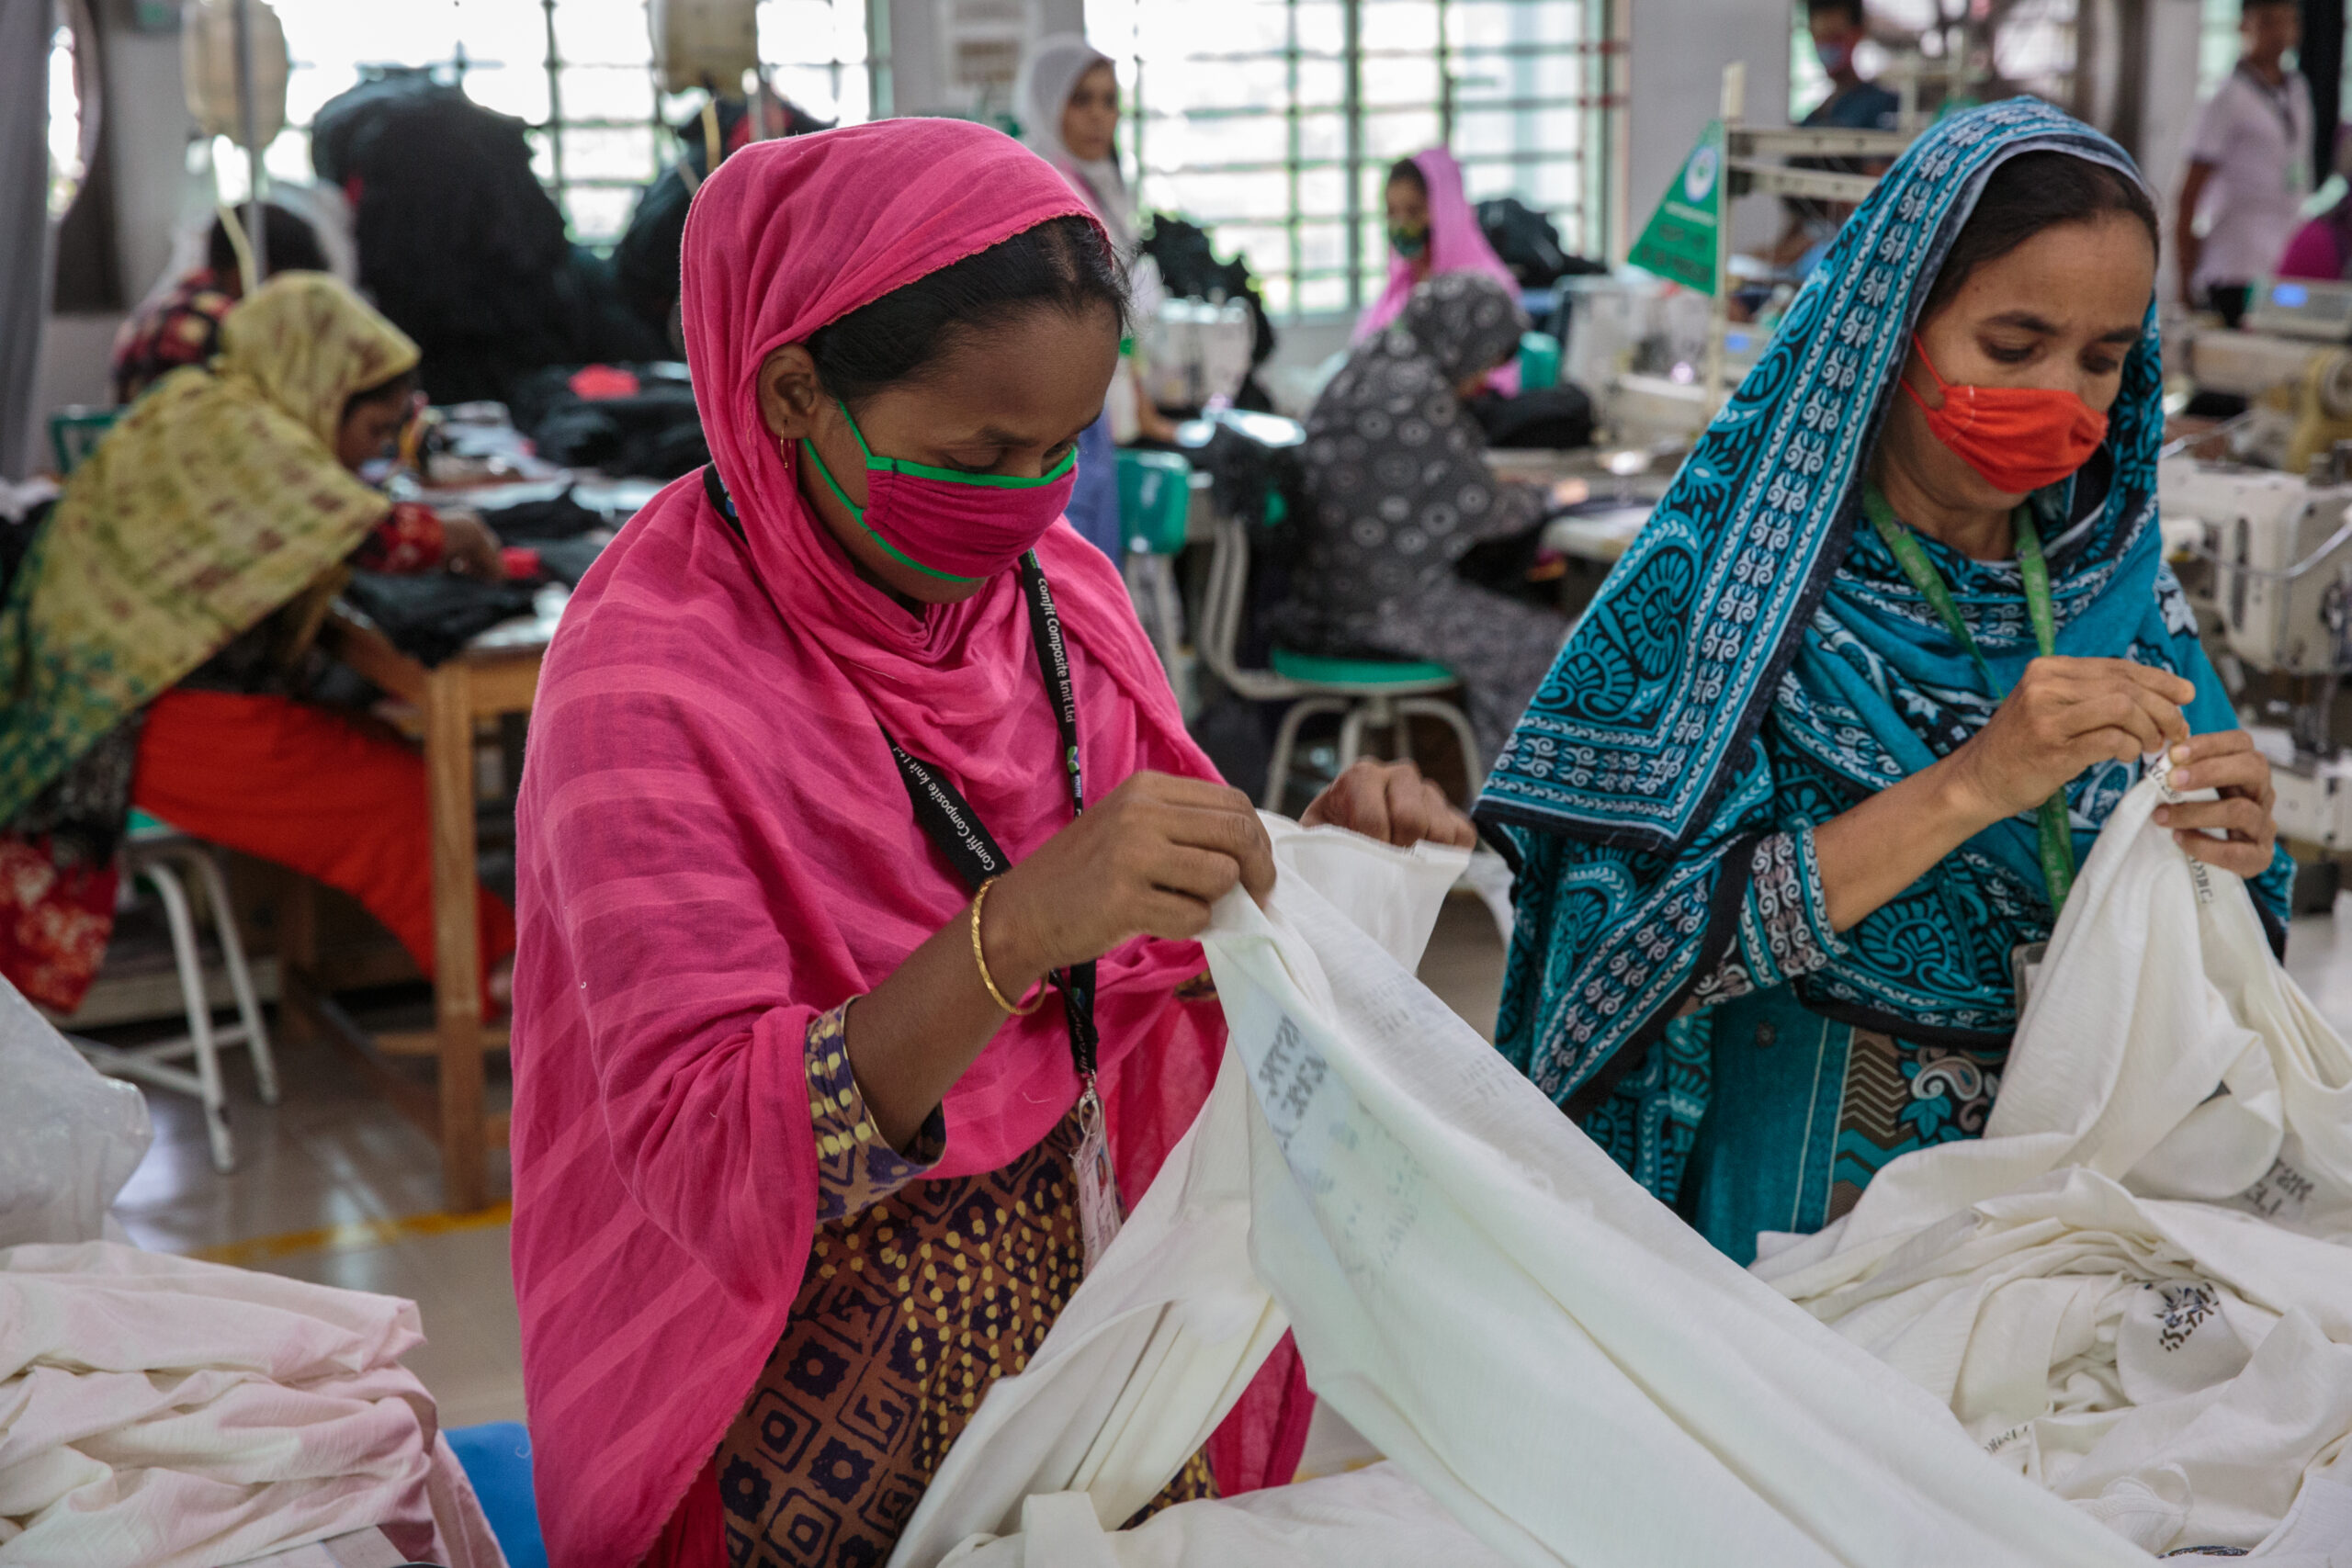 Female garment workers sort through fabric in a  factory located outside of of Dhaka, Bangladesh on October 2, 2018. This particular factory, owned by European fashion retailer C&amp;A has 650 employees, 55 percent of whom are women. 16 women have been trained on issues around sexual harassment, and they will pass their training onto other women. According to Human Rights Watch,  sexual harassment in garment factories in Cambodia, Bangladesh, Burma, and Pakistan were rife with abuse, legal protections did not exist or were weakly enforced, and efforts to audit factories or monitor for harassment were ineffective. Sara Hylton for Global Fund for Women